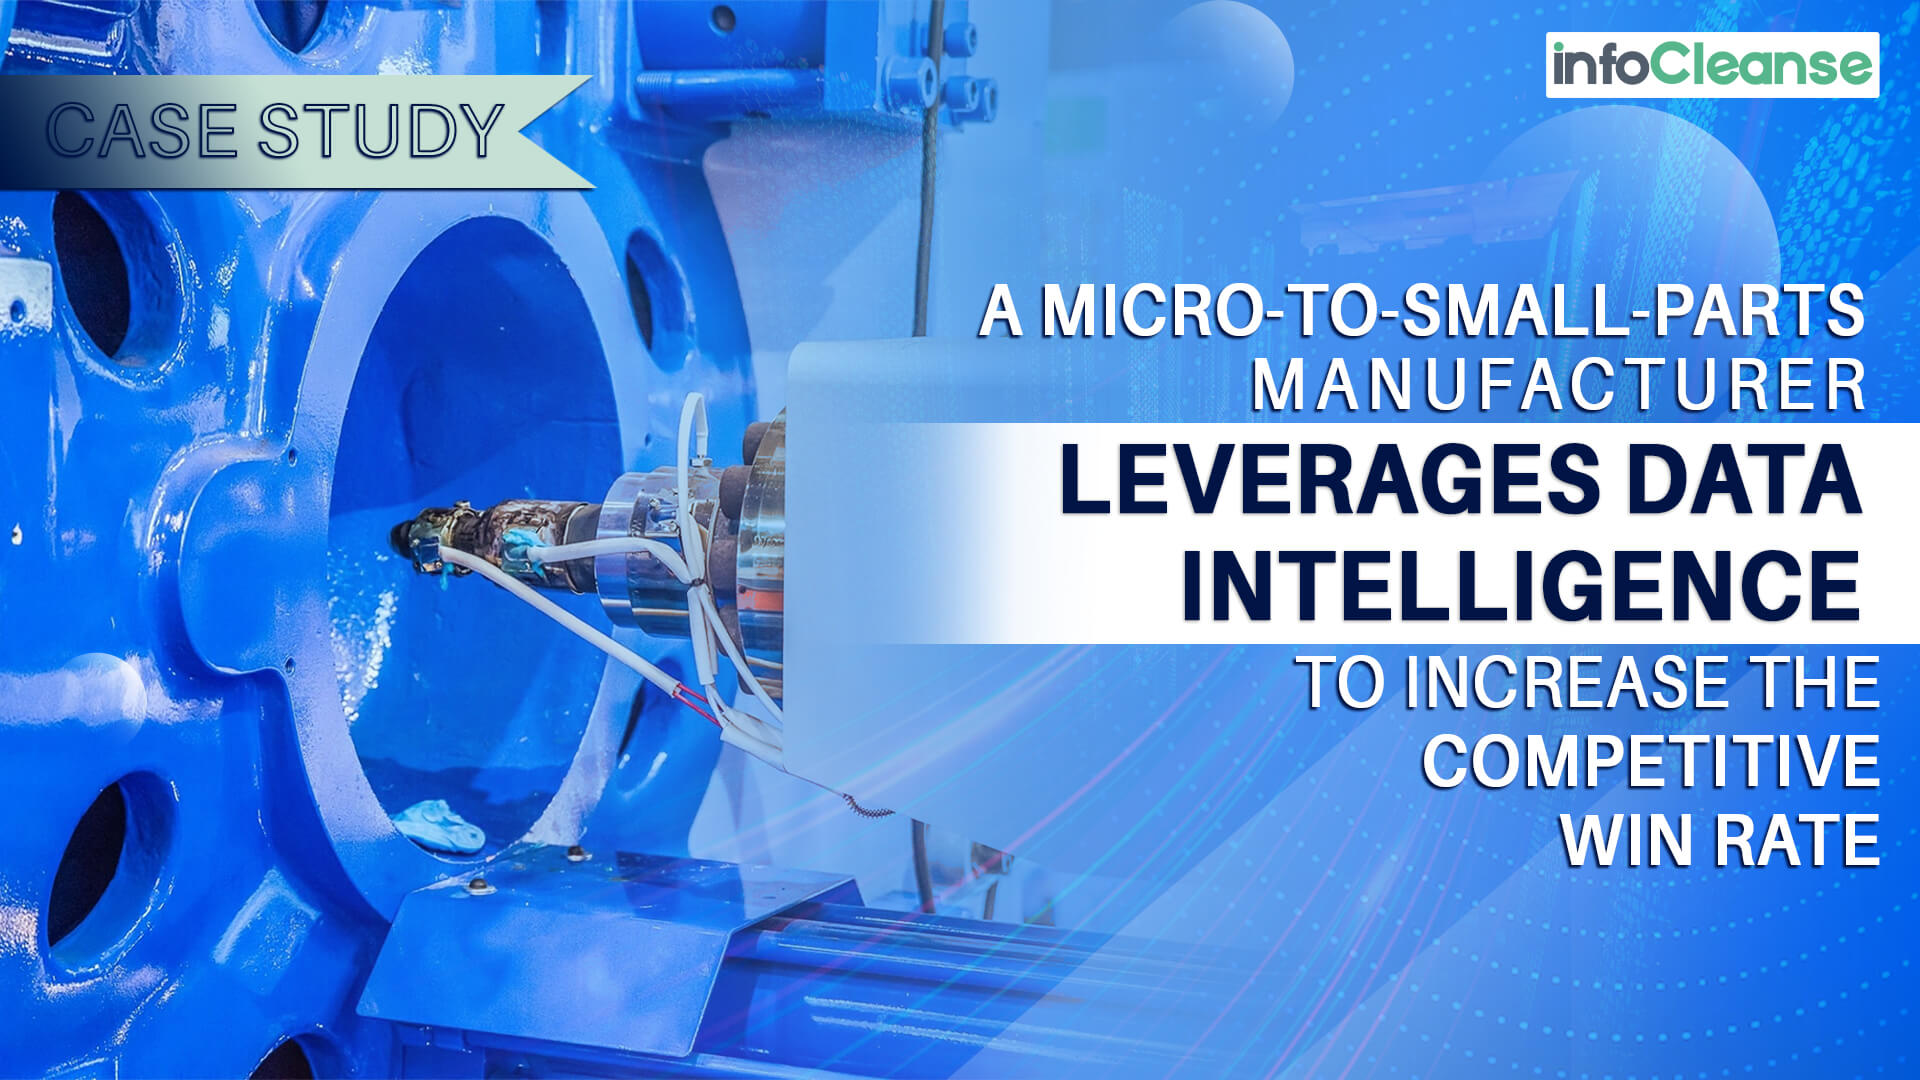 A Micro-to-Small-Parts Manufacturer leverages data intelligence to Increase the Competitive win rate